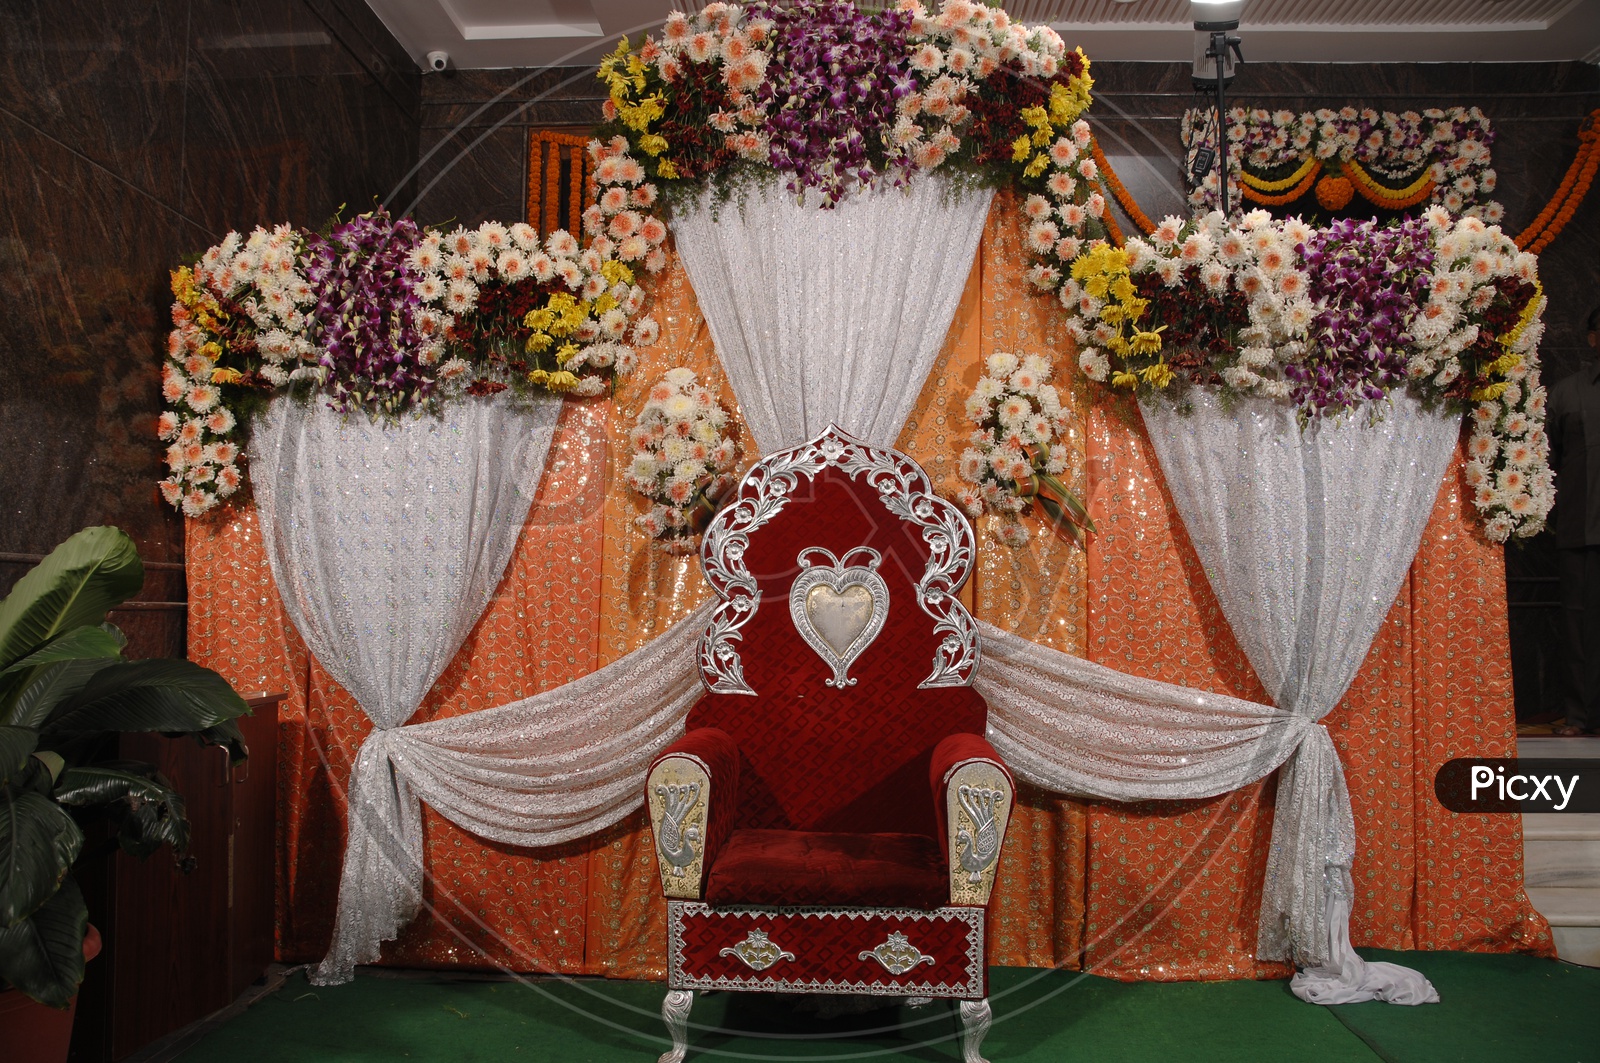 Flowers Decoration of a stage / Dias and chair on it